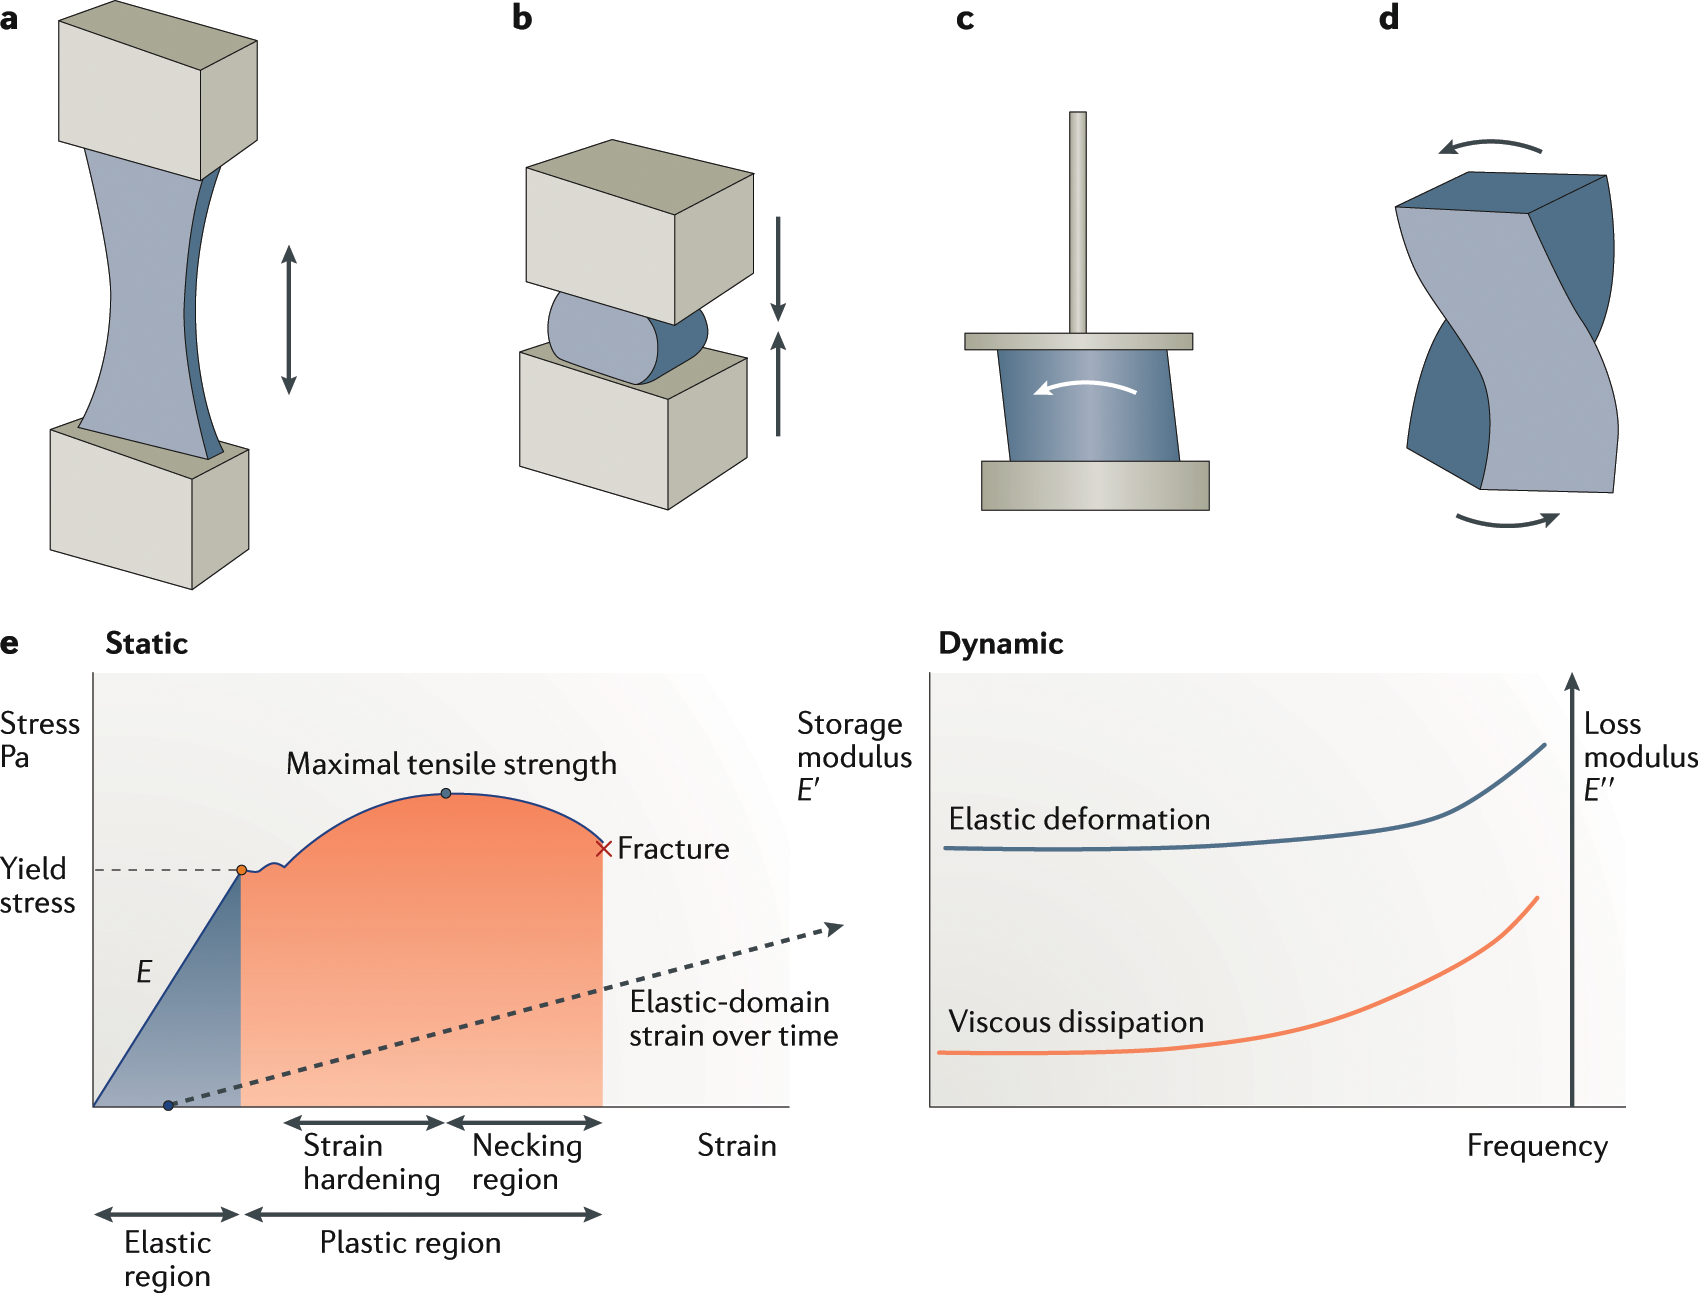 The stiffness of living tissues and its implications for tissue engineering  | Nature Reviews Materials